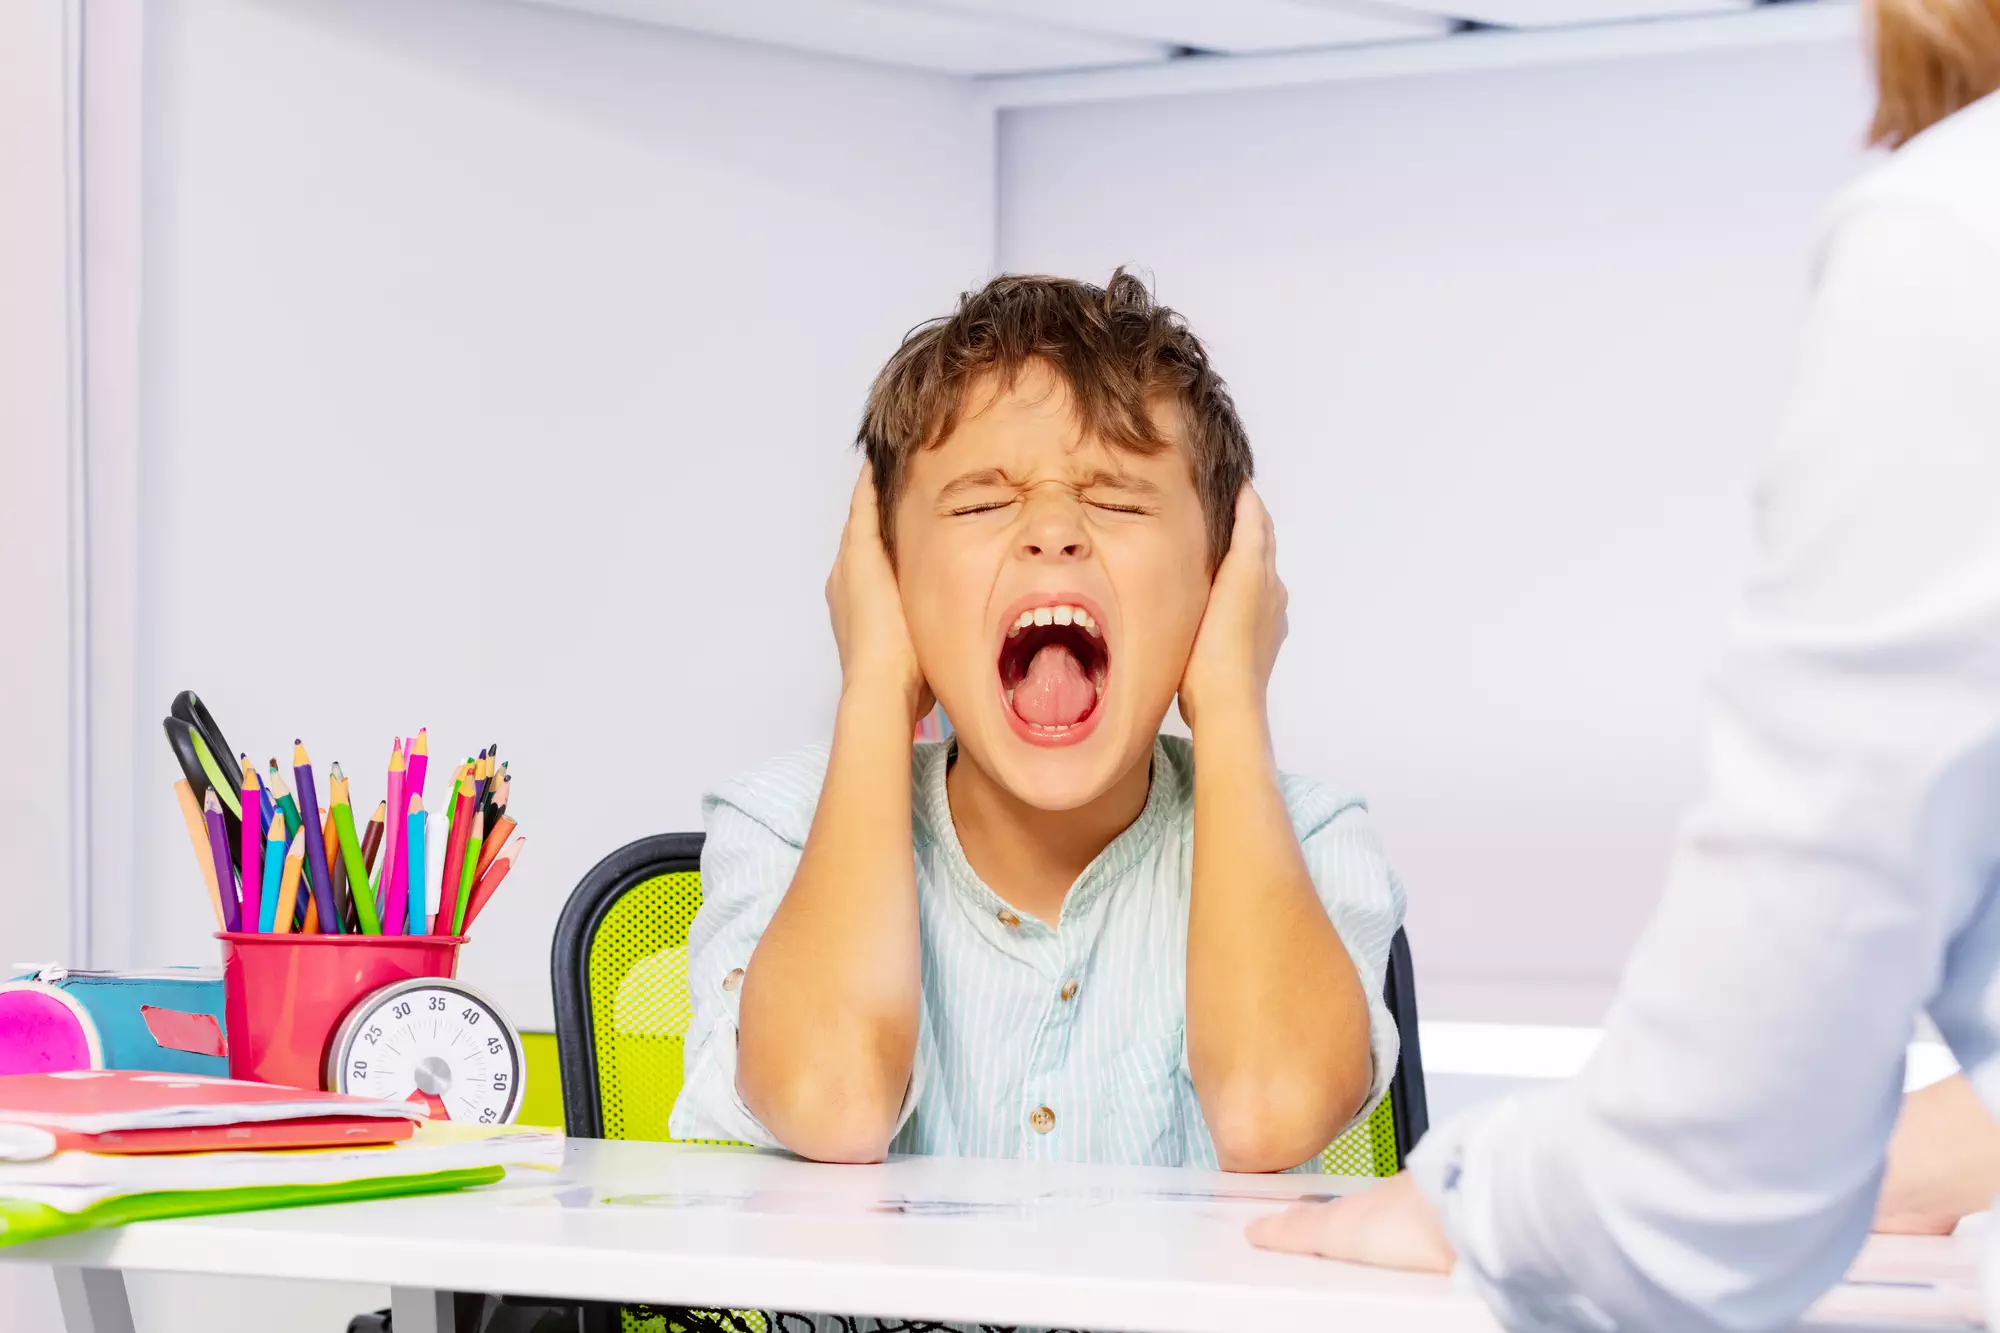 identifying emotions with kid screaming